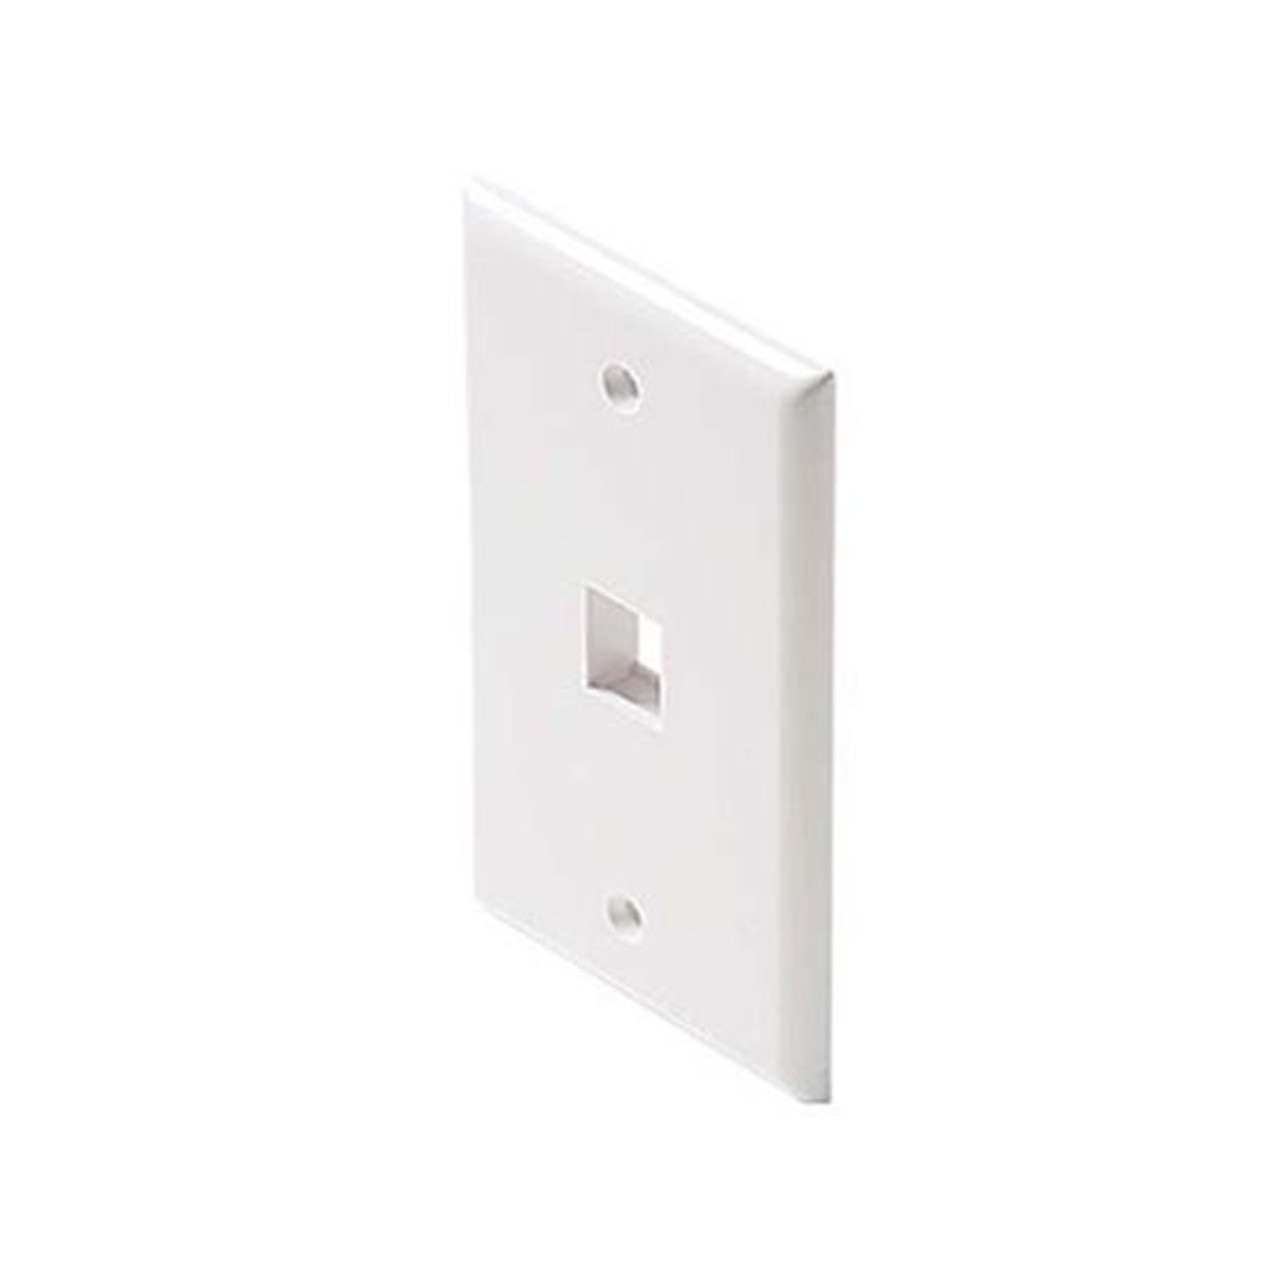 Eagle 1 Port Keystone Wall Plate White Single Cavity QuickPort Flush Mount, Easy Audio Video Data Junction Component Snap-In Insert Connection